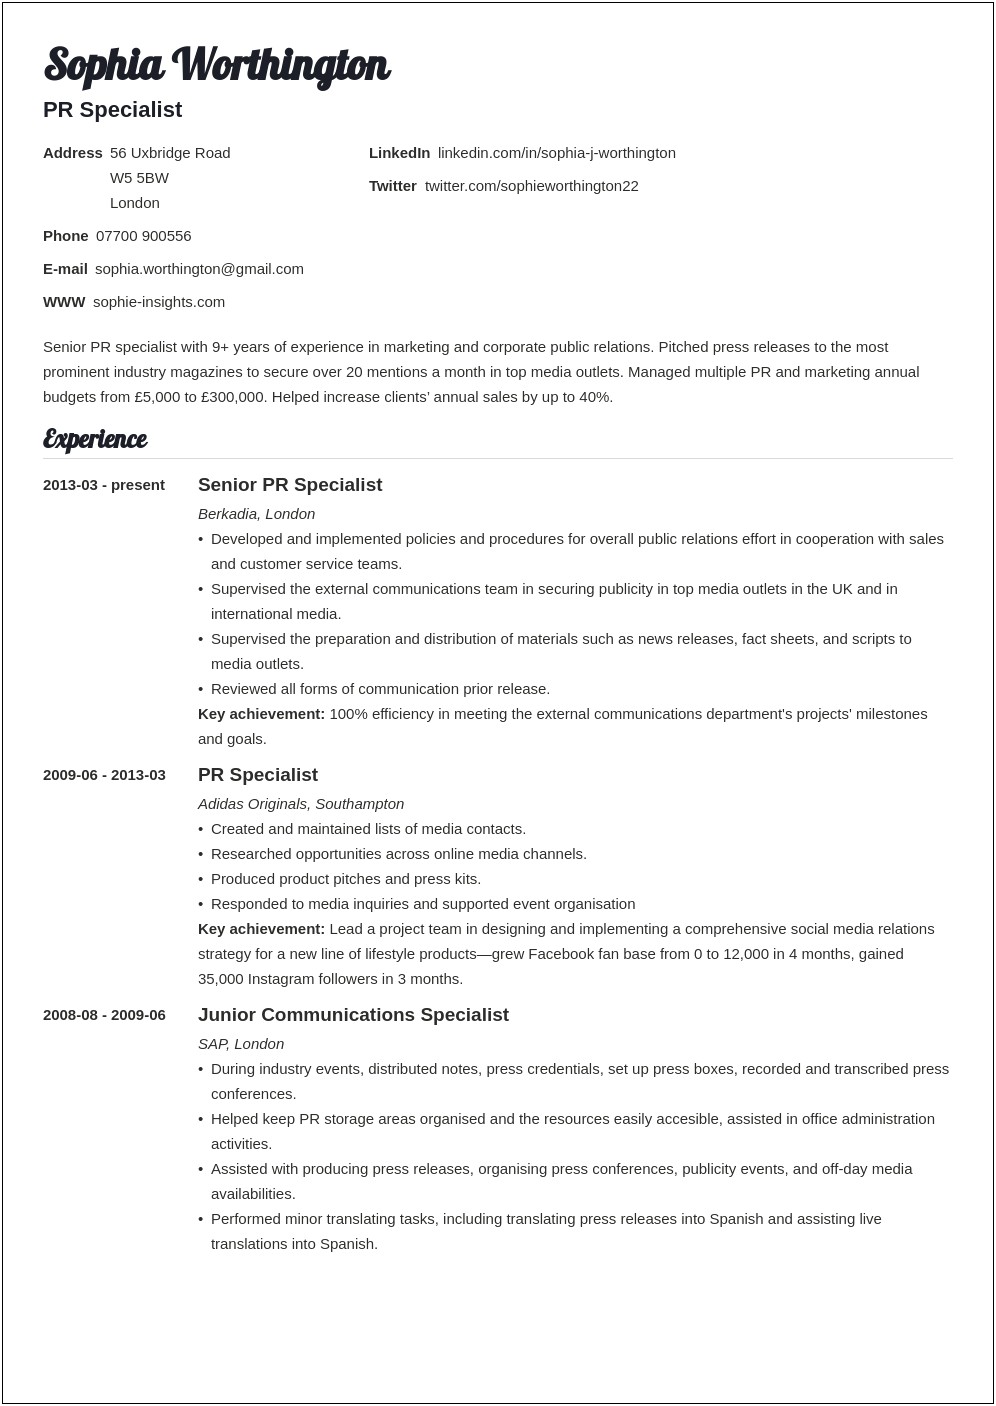 Sample Resume With Application Type Details